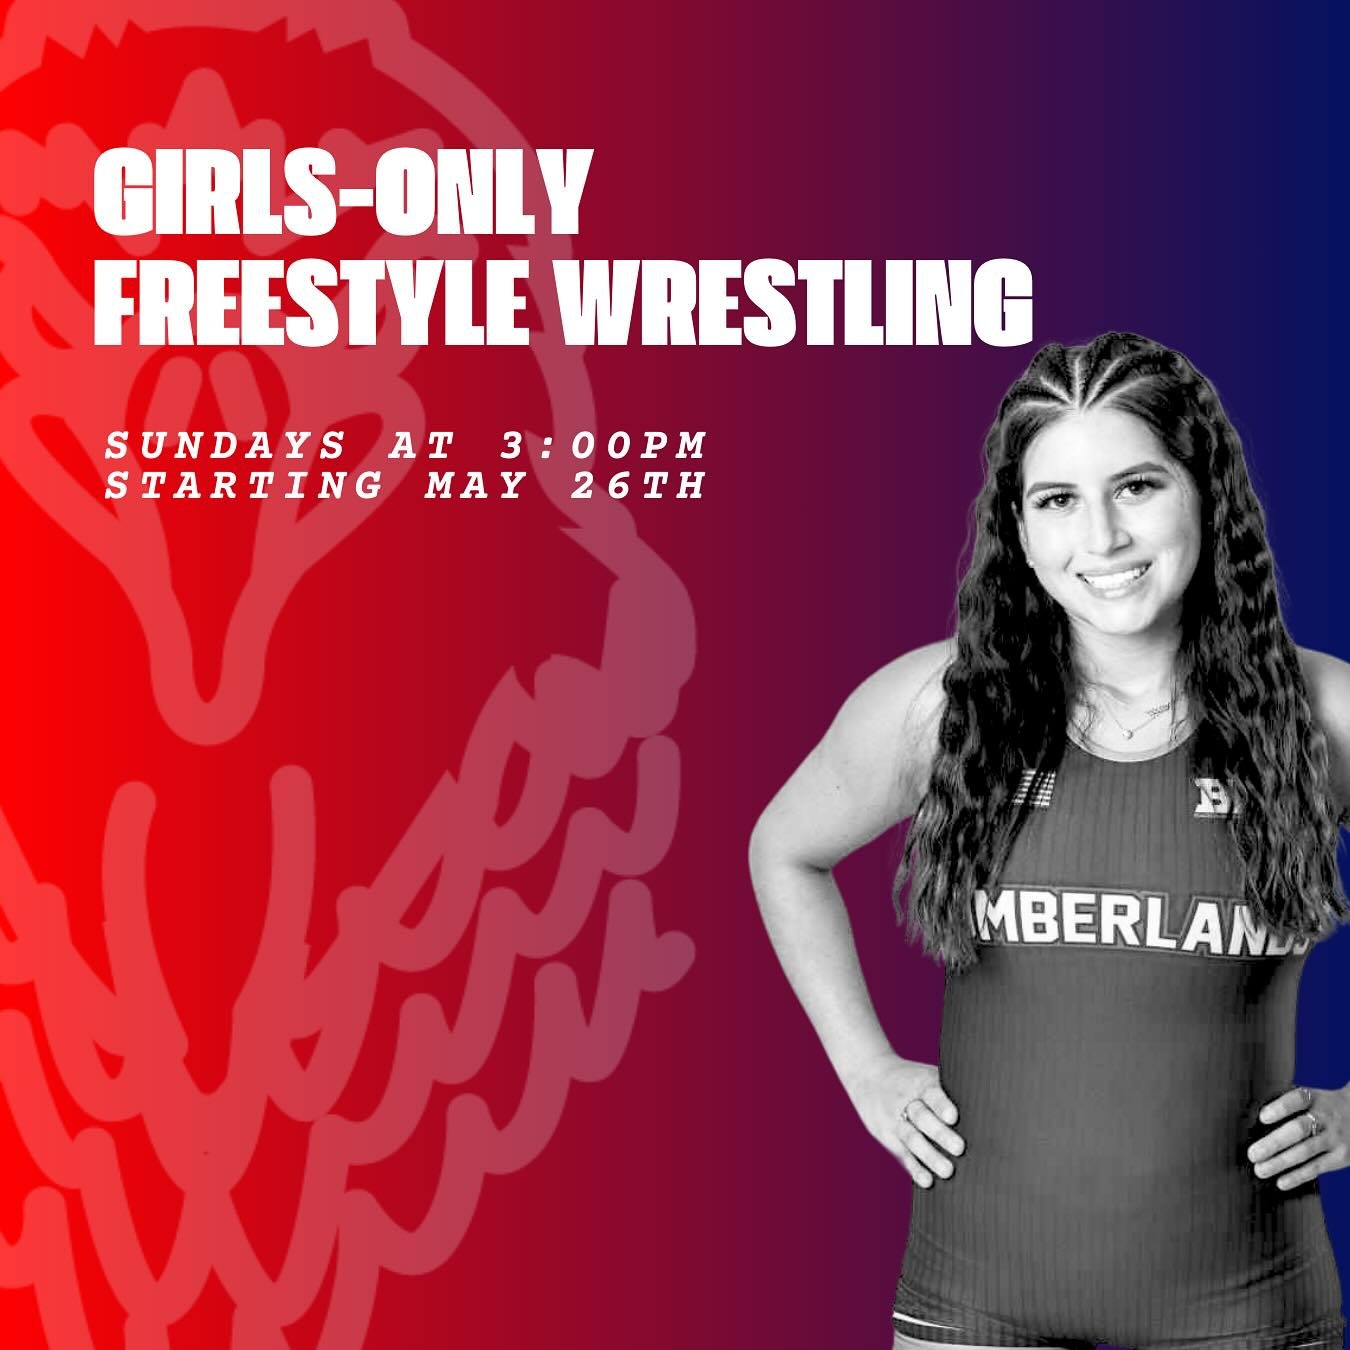 New things coming to the gym! Join us for freestyle wrestling (girls only!) Sundays at 3:00pm starting May 26th. All ages and ability levels welcome. 🔥👯&zwj;♀️

Learn from collegiate level wrestlers @zoey.smith_  and @dylan_hernandez34! 🦅 
__
#gir